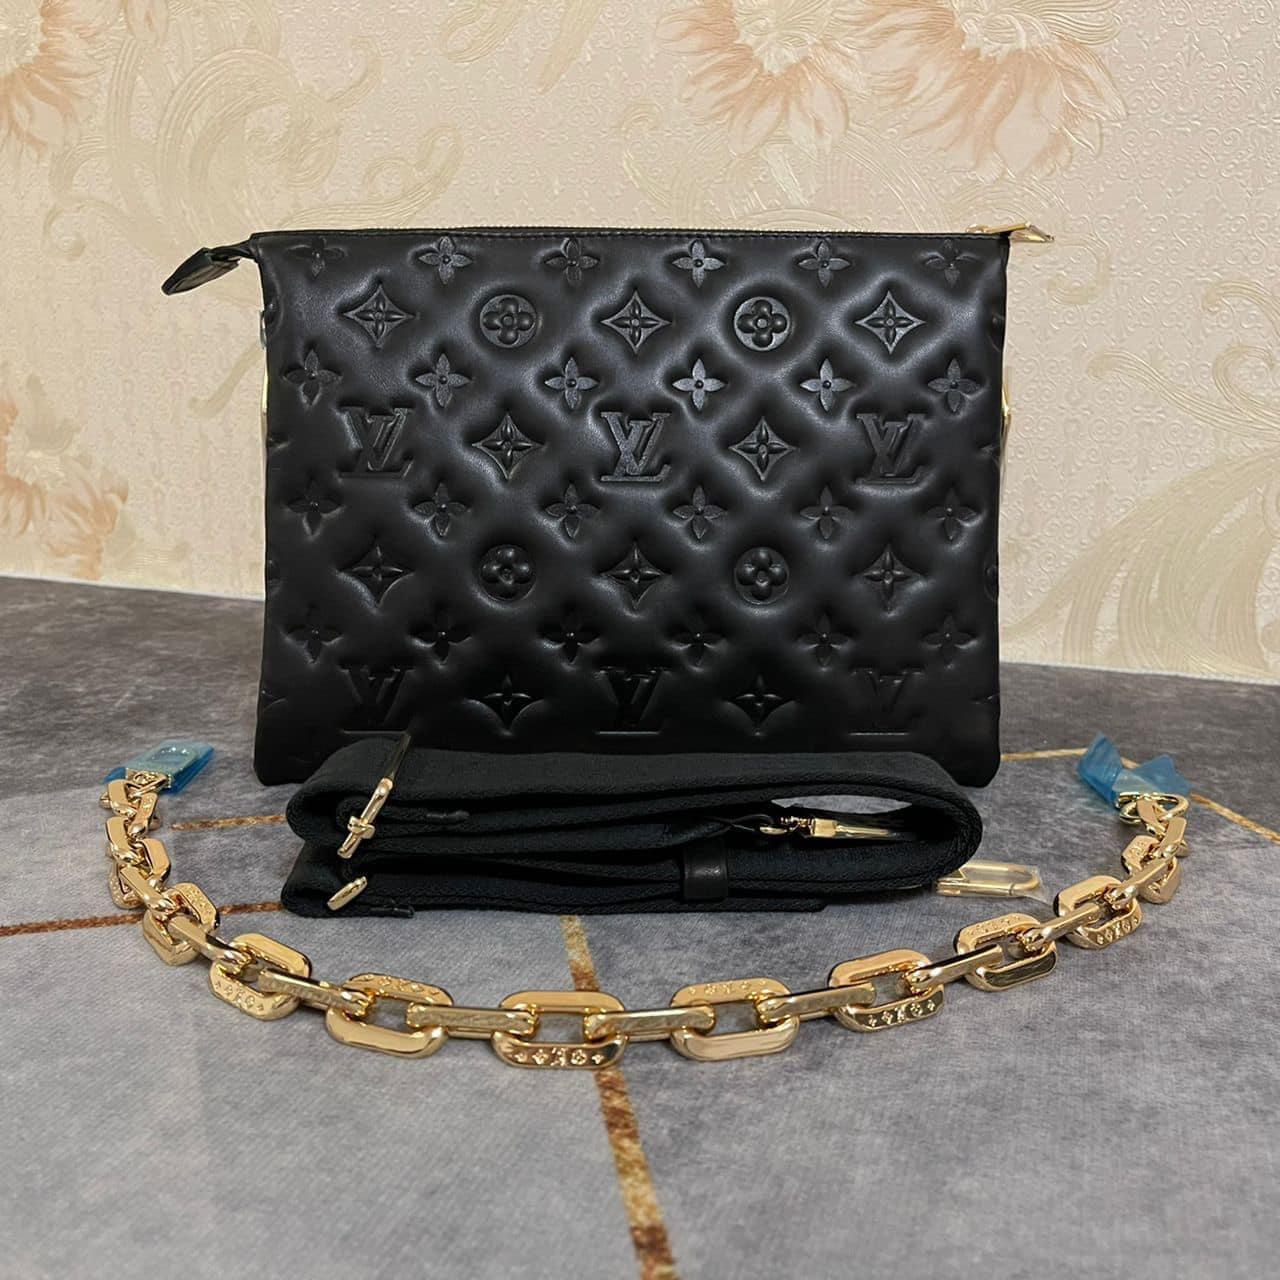 Looking for this louis vuitton unicef lockit - Depop